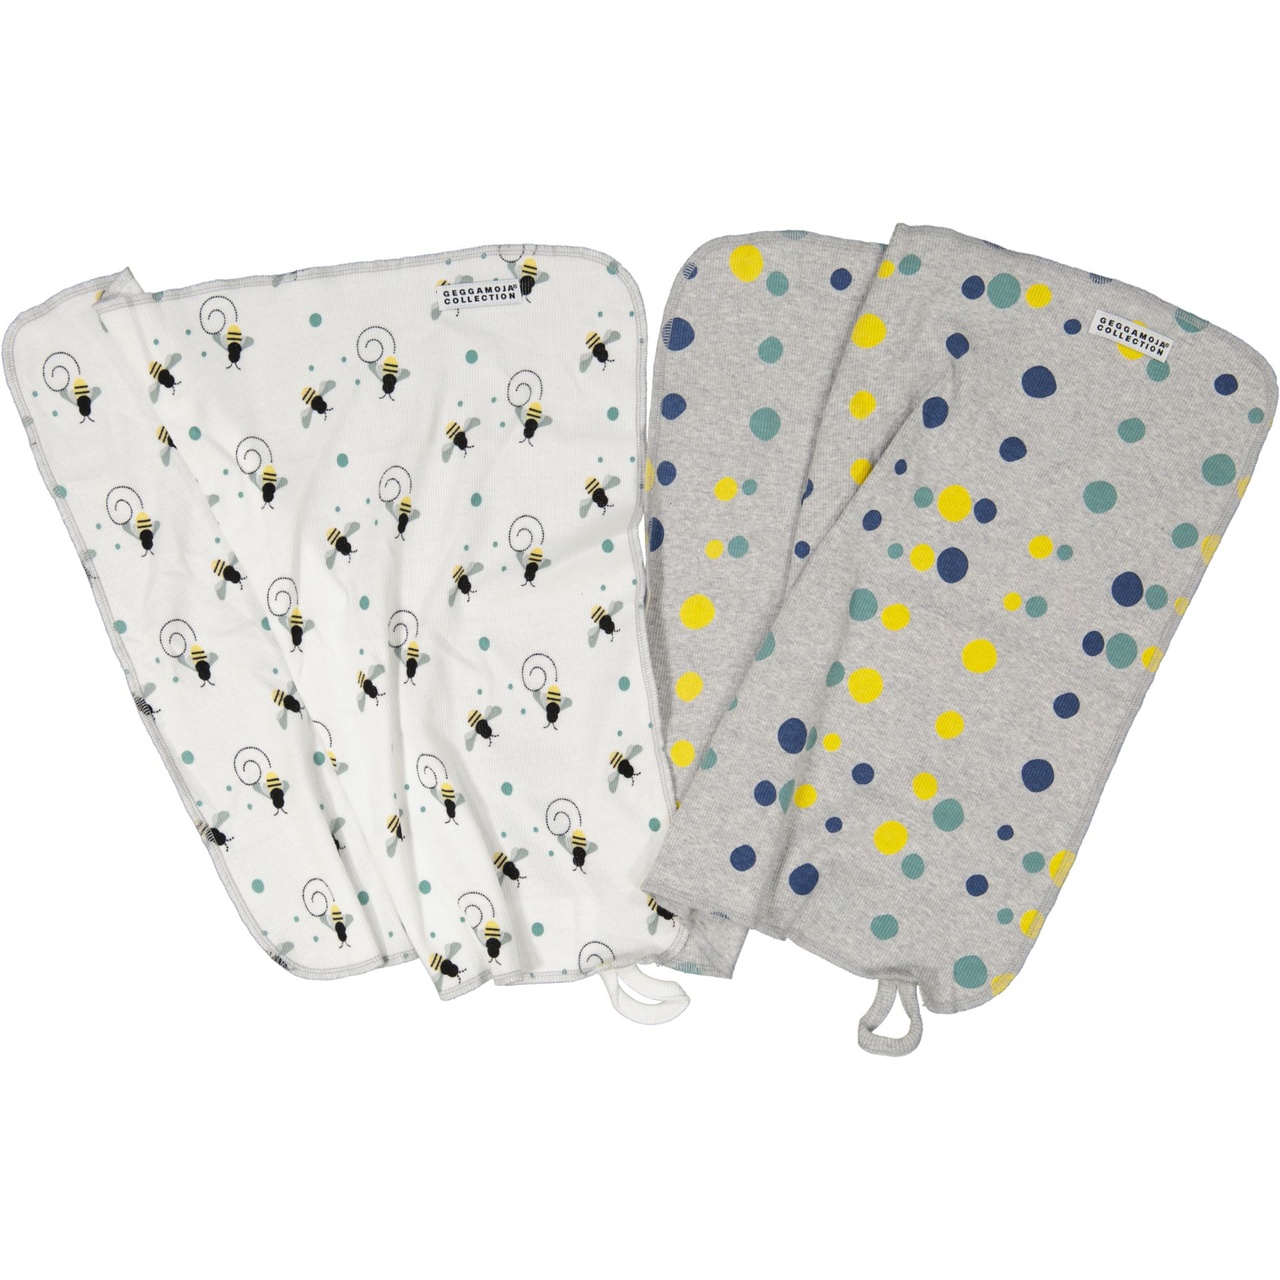 Cuddly blanket Dots  One Size